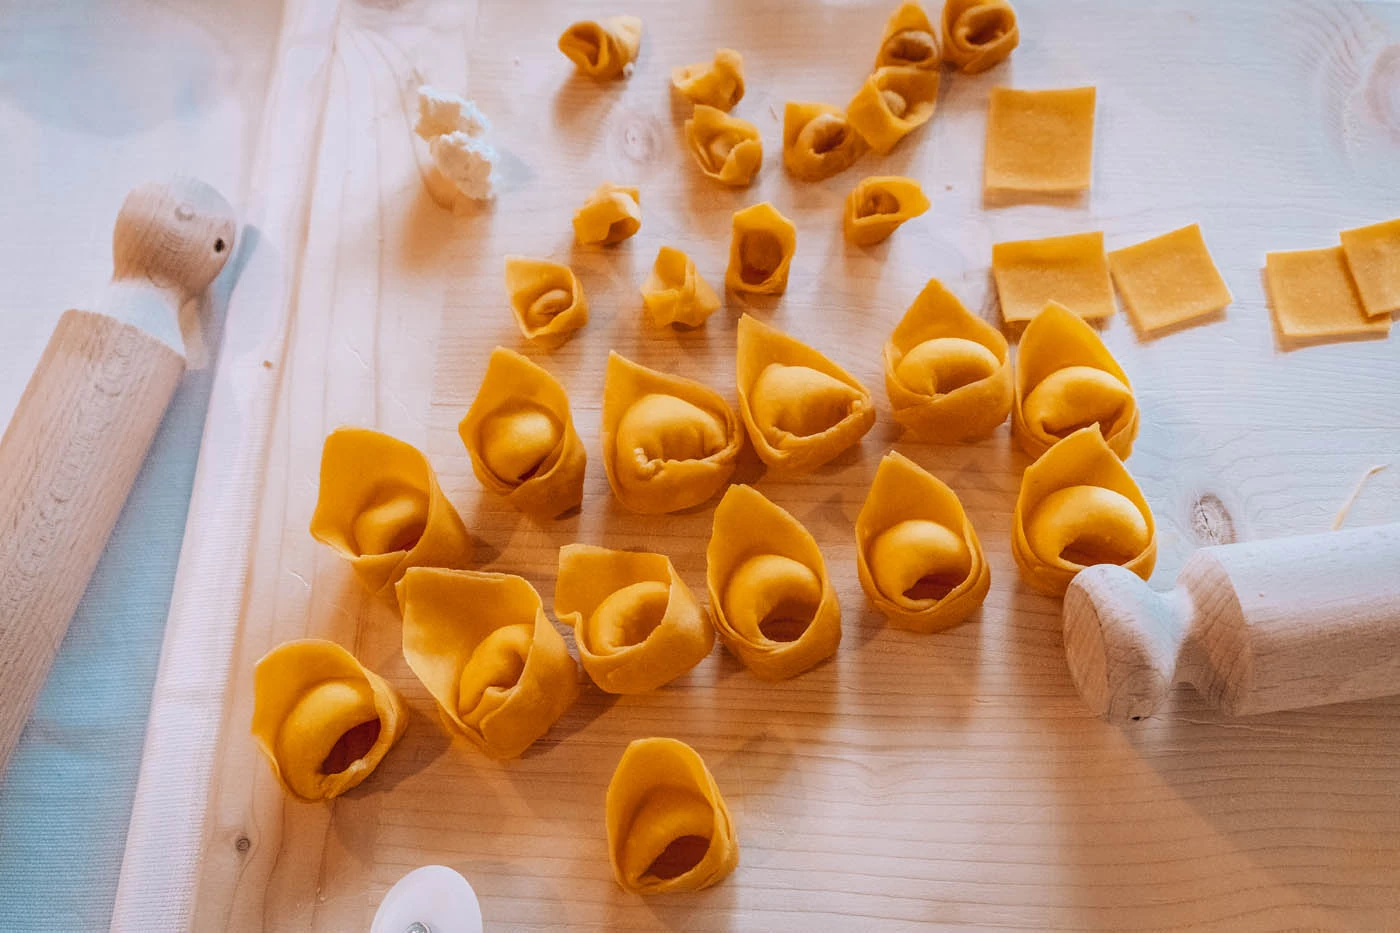 Things to Do in Bologna - Tortellini pasta-making workshop